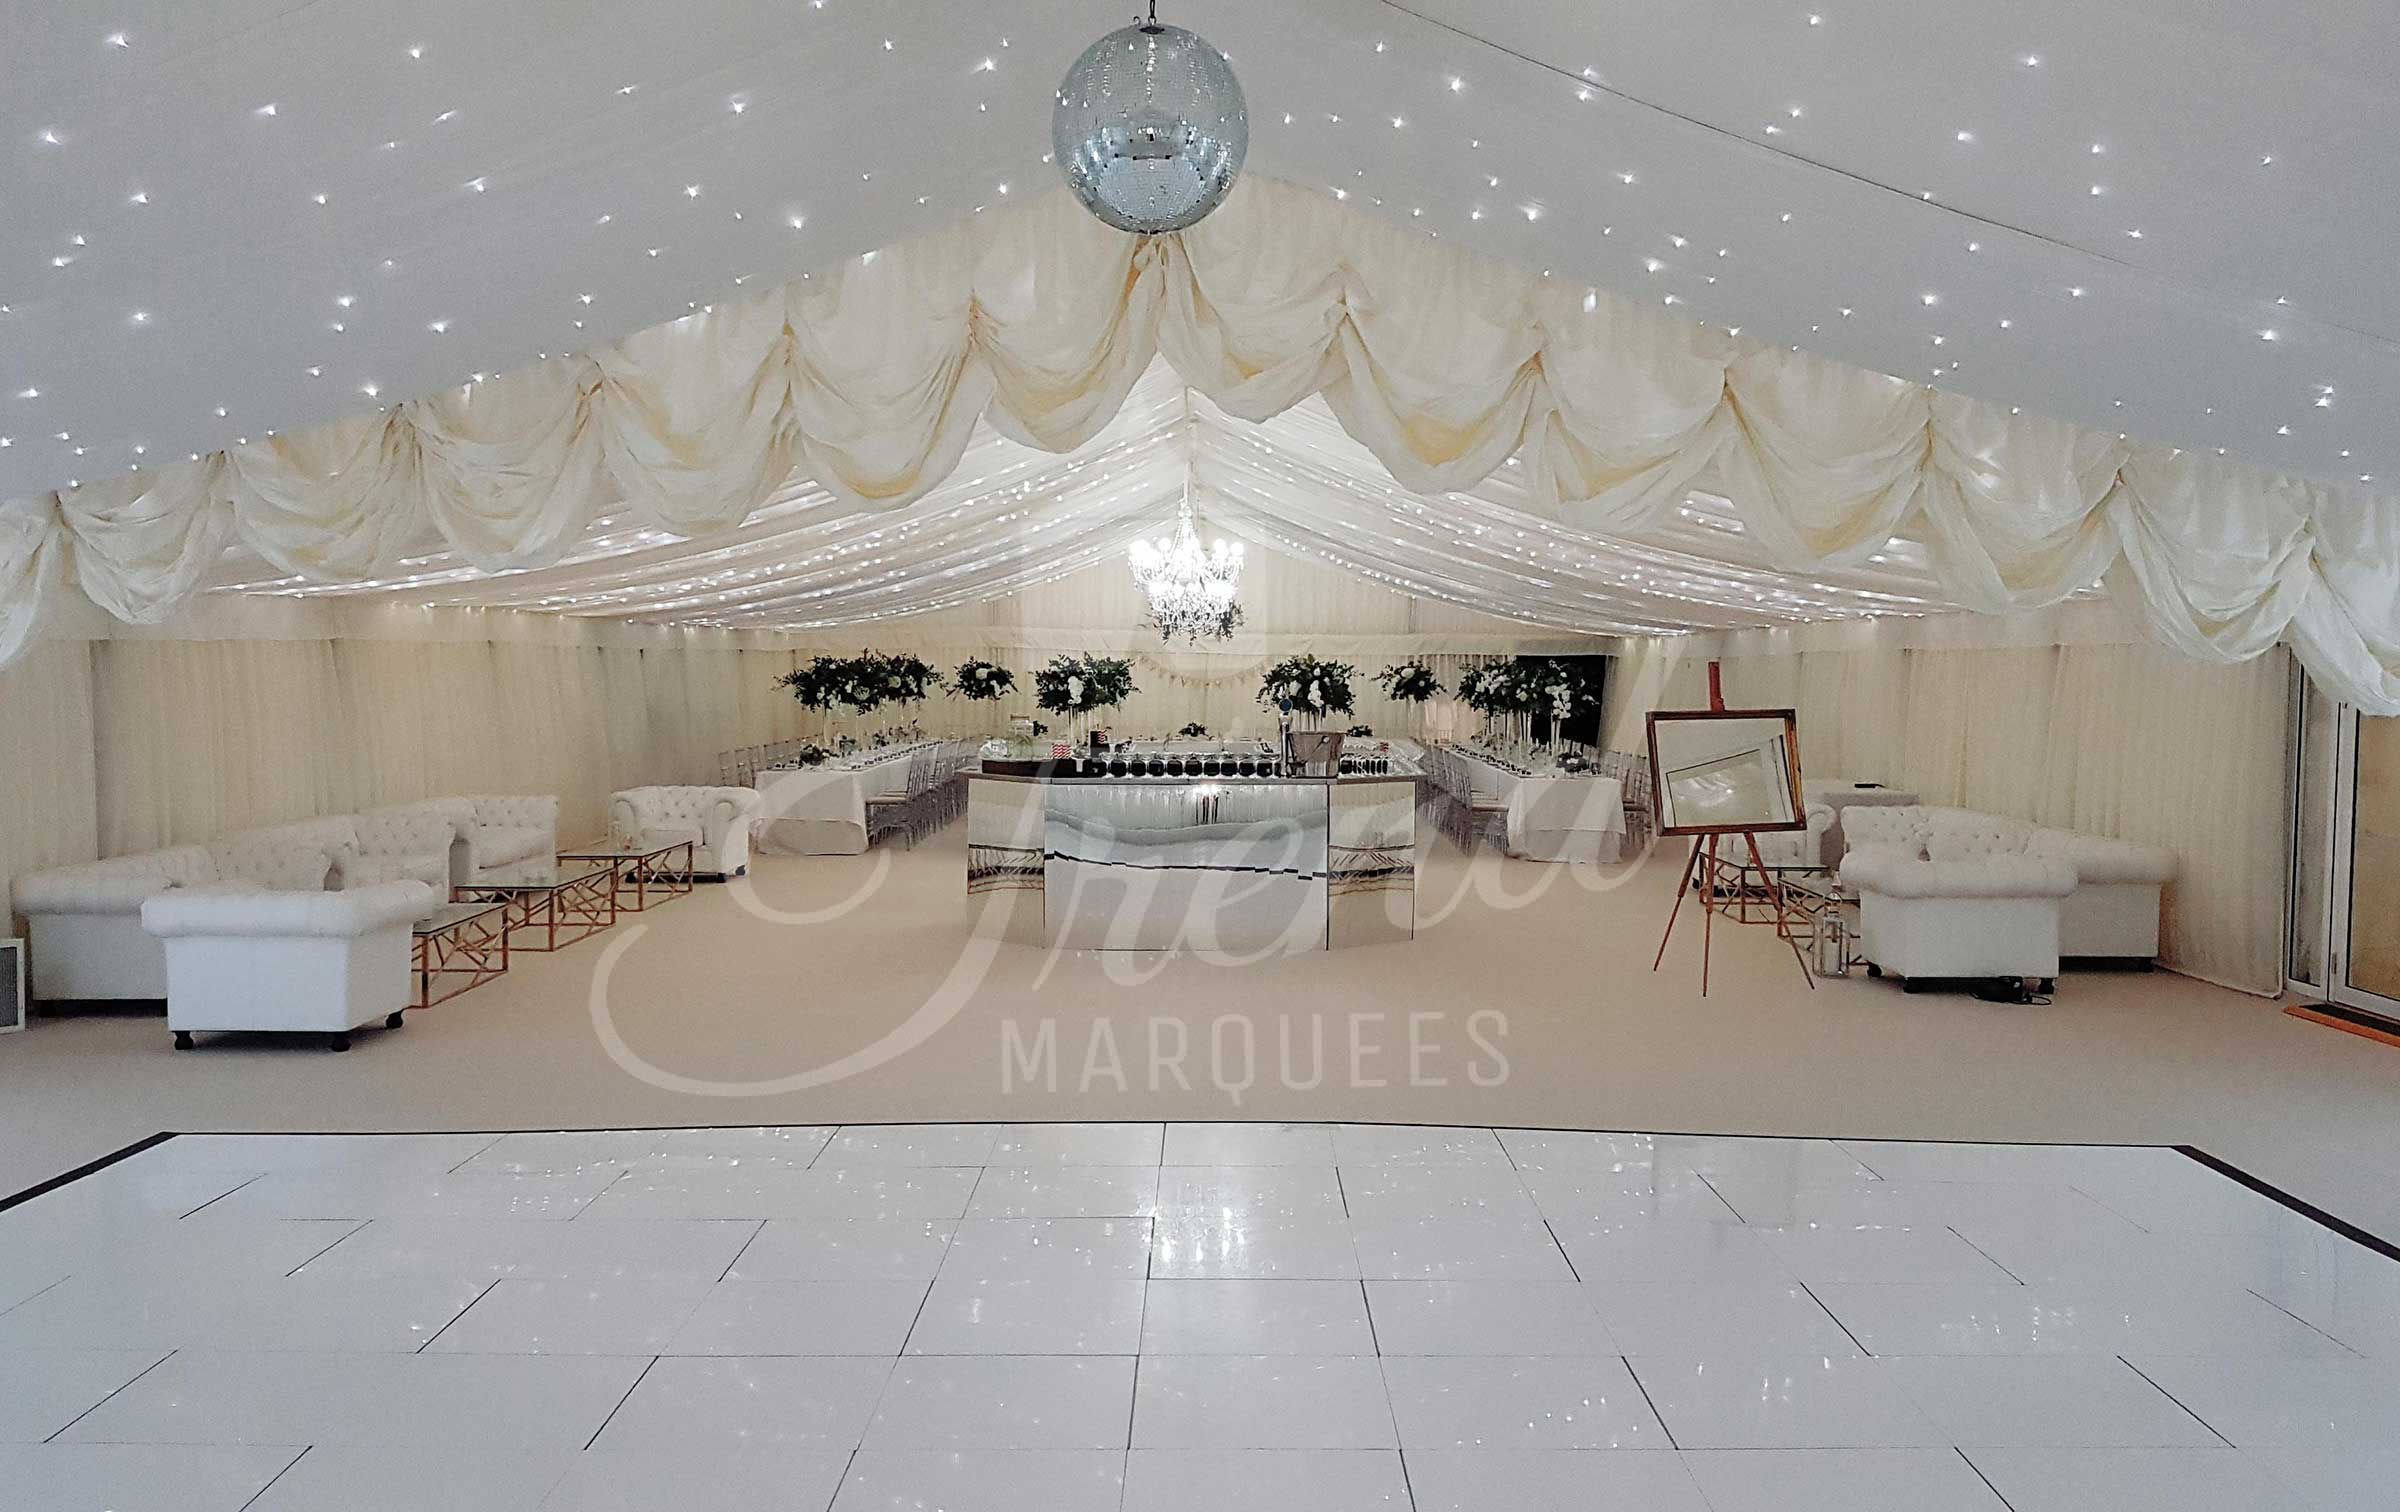 Wedding marquee hire from Trend Marquees